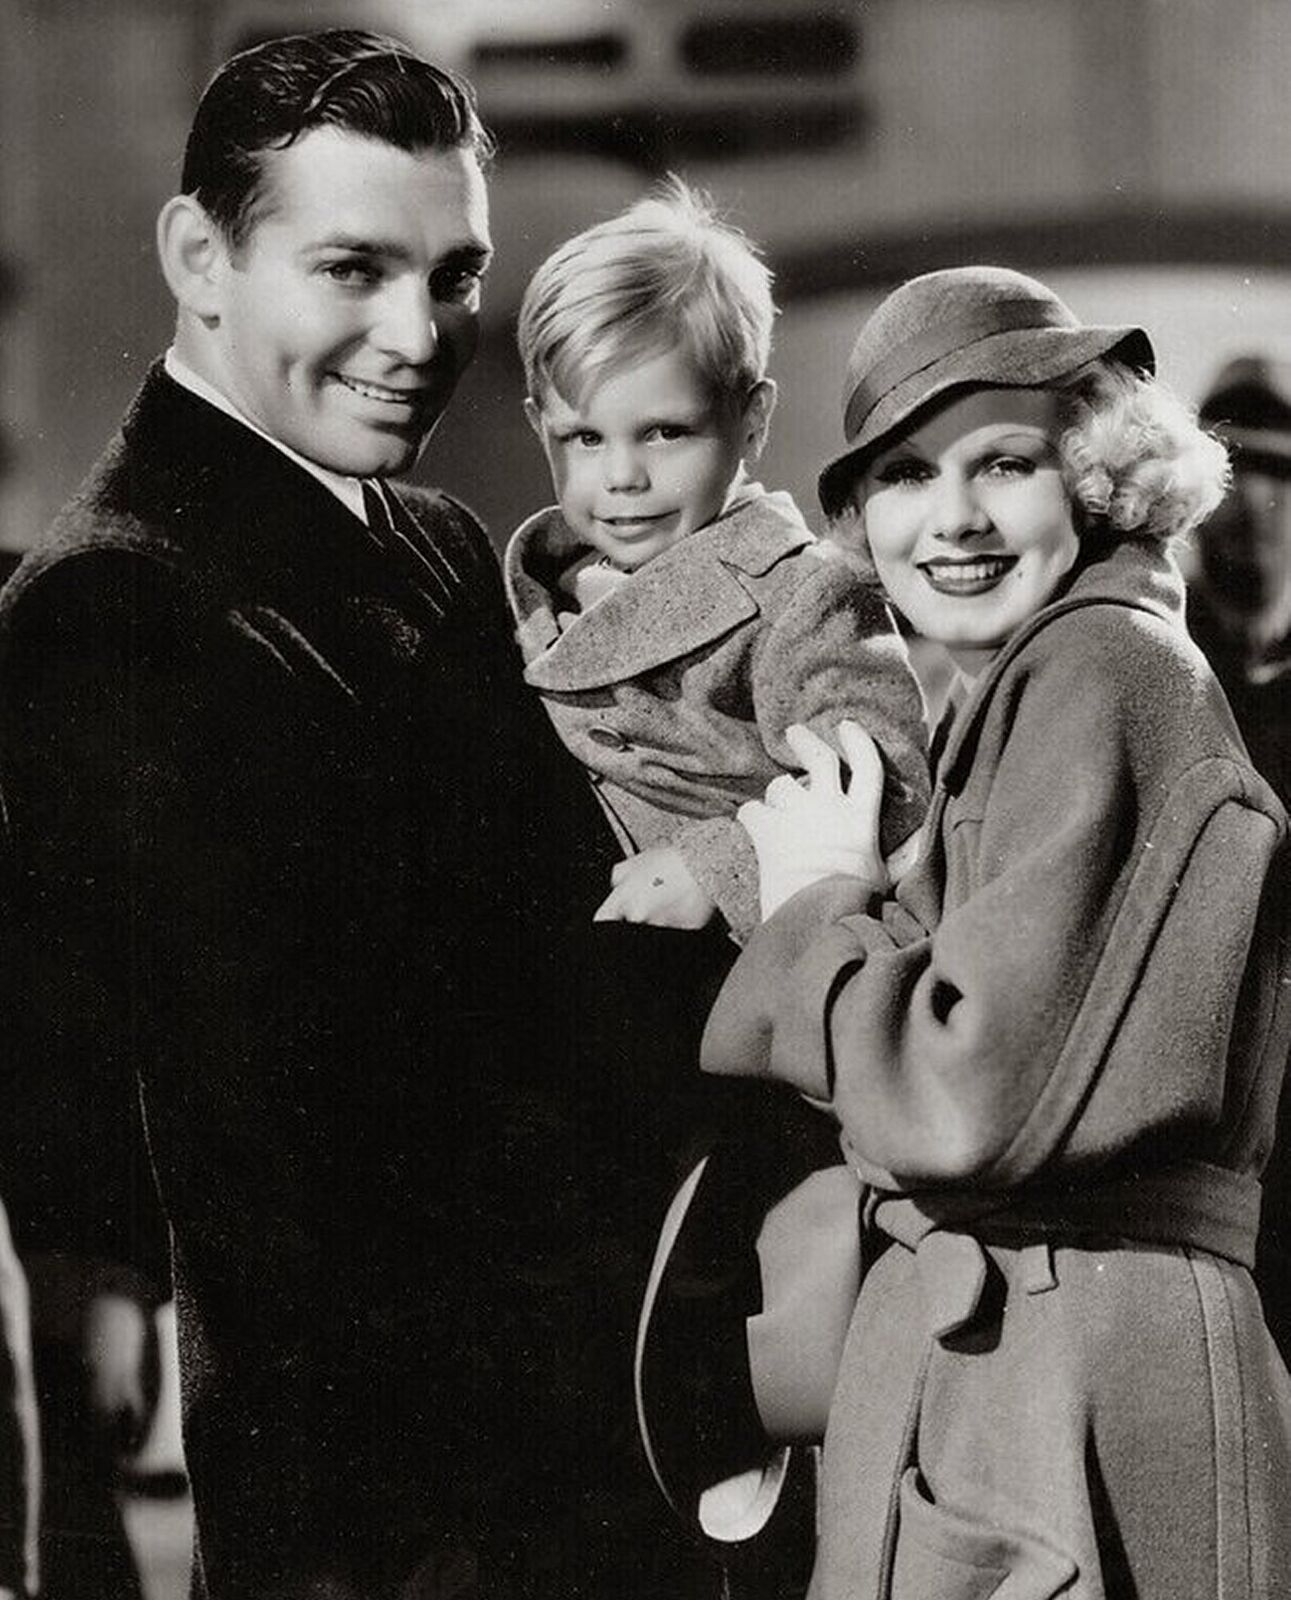 1932 CLARK GABLE & JEAN HARLOW in HOLD YOUR MAN Photo   (230-Y)